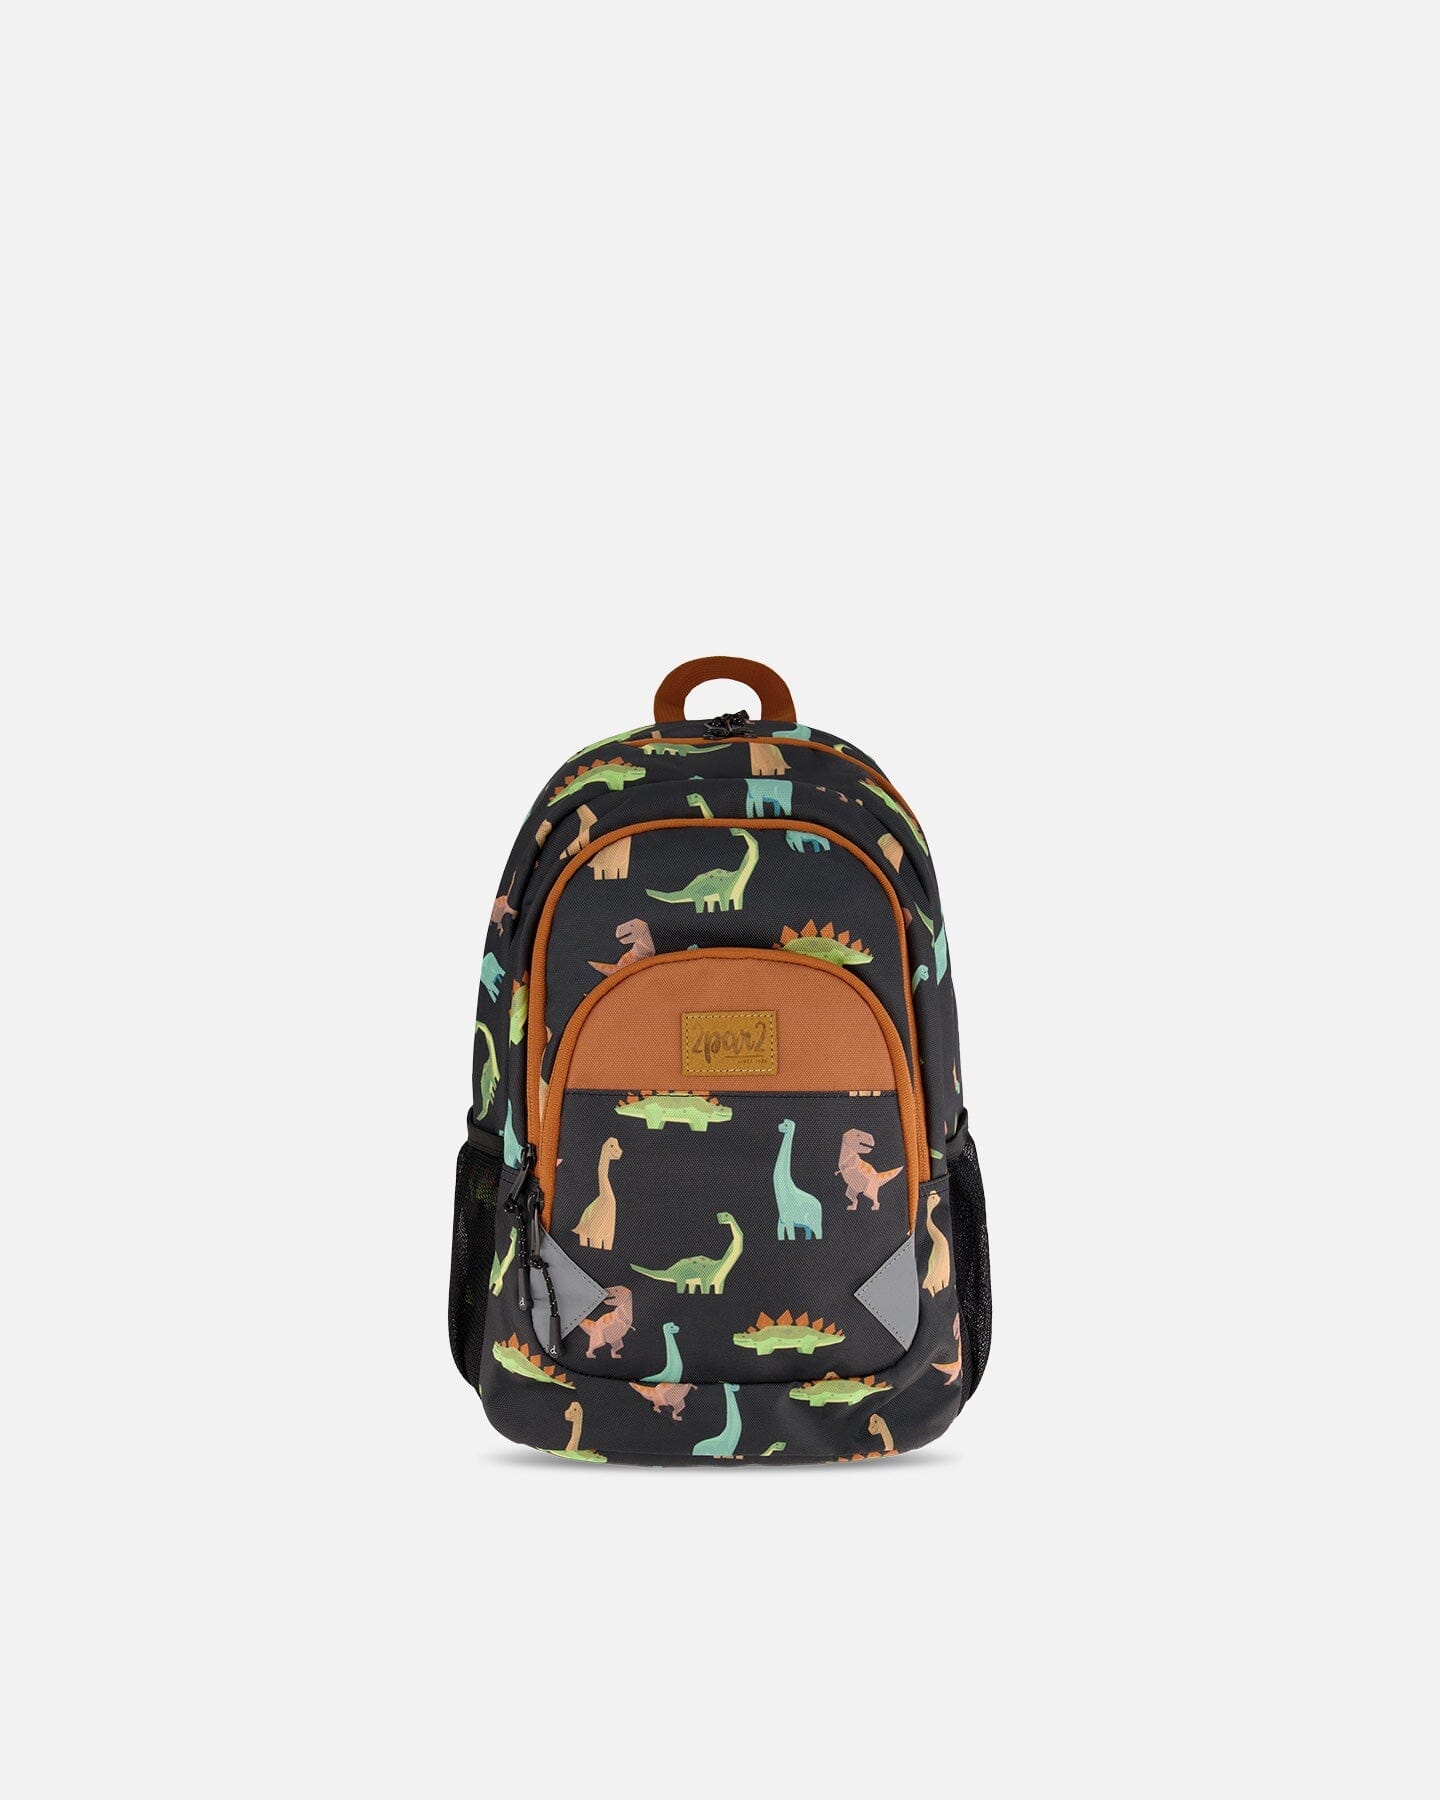 Toddler Backpack Black With Dinosaurs Print - F20ZSD2_051